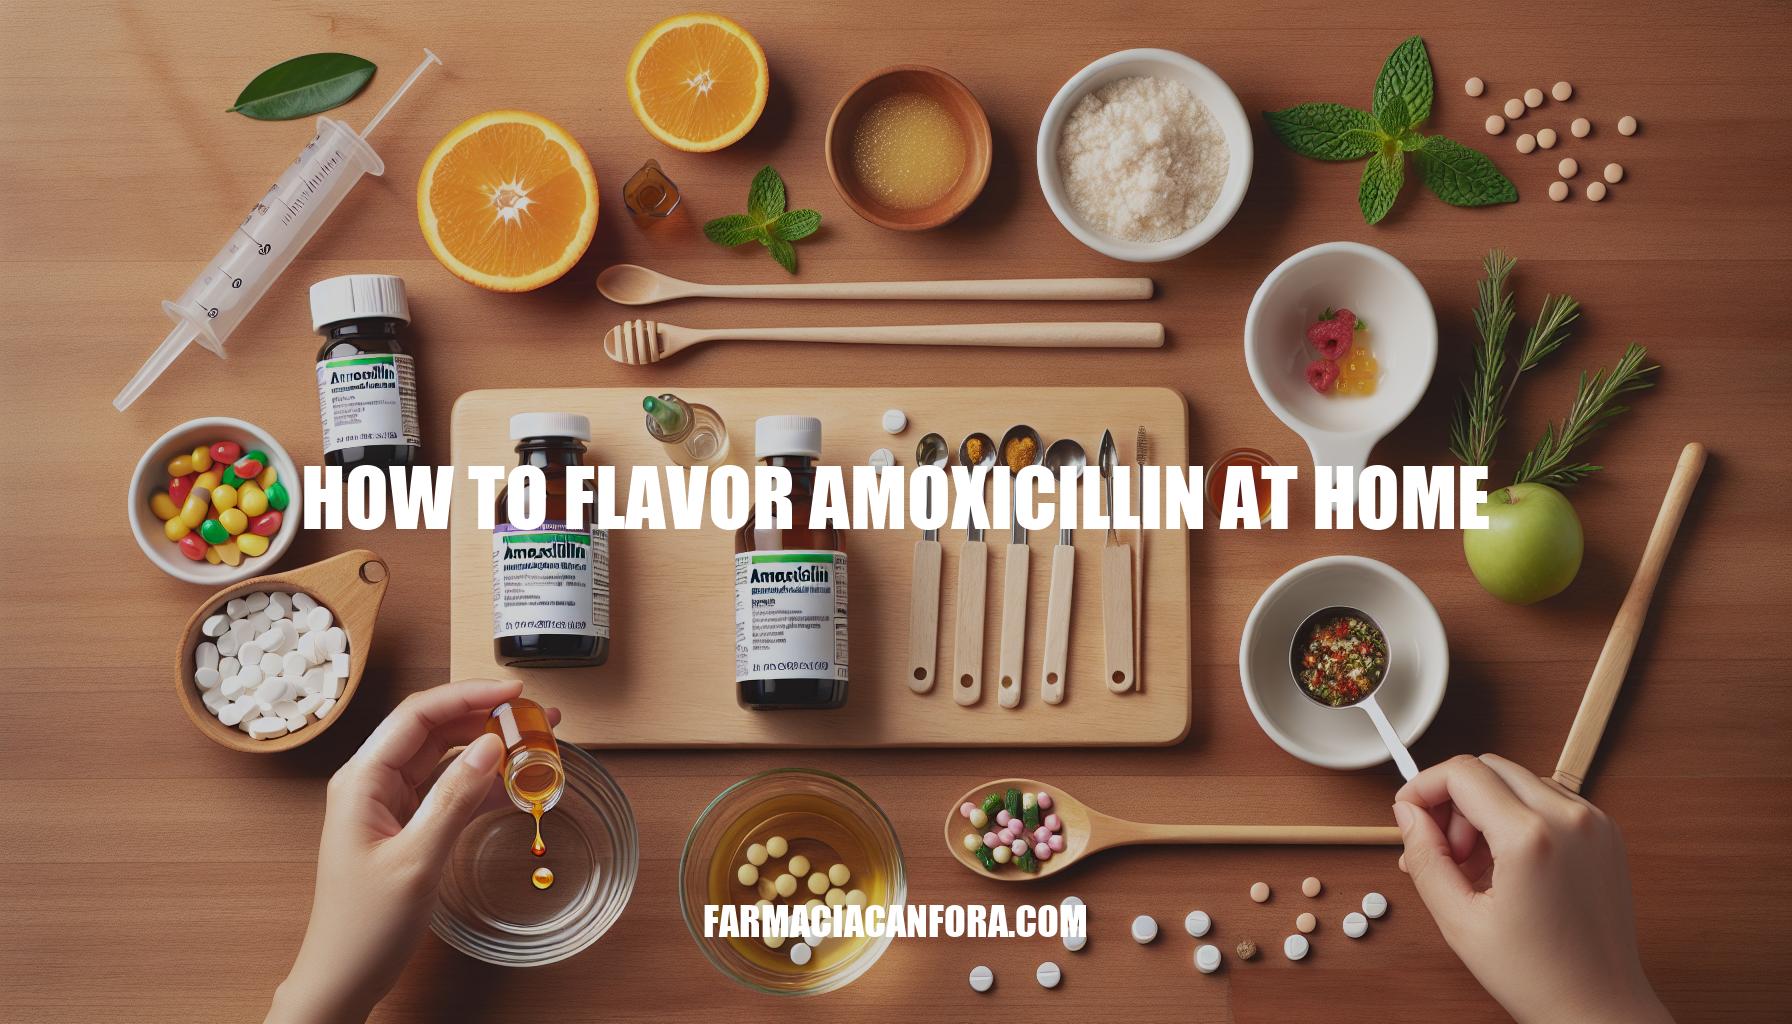 How to Flavor Amoxicillin at Home